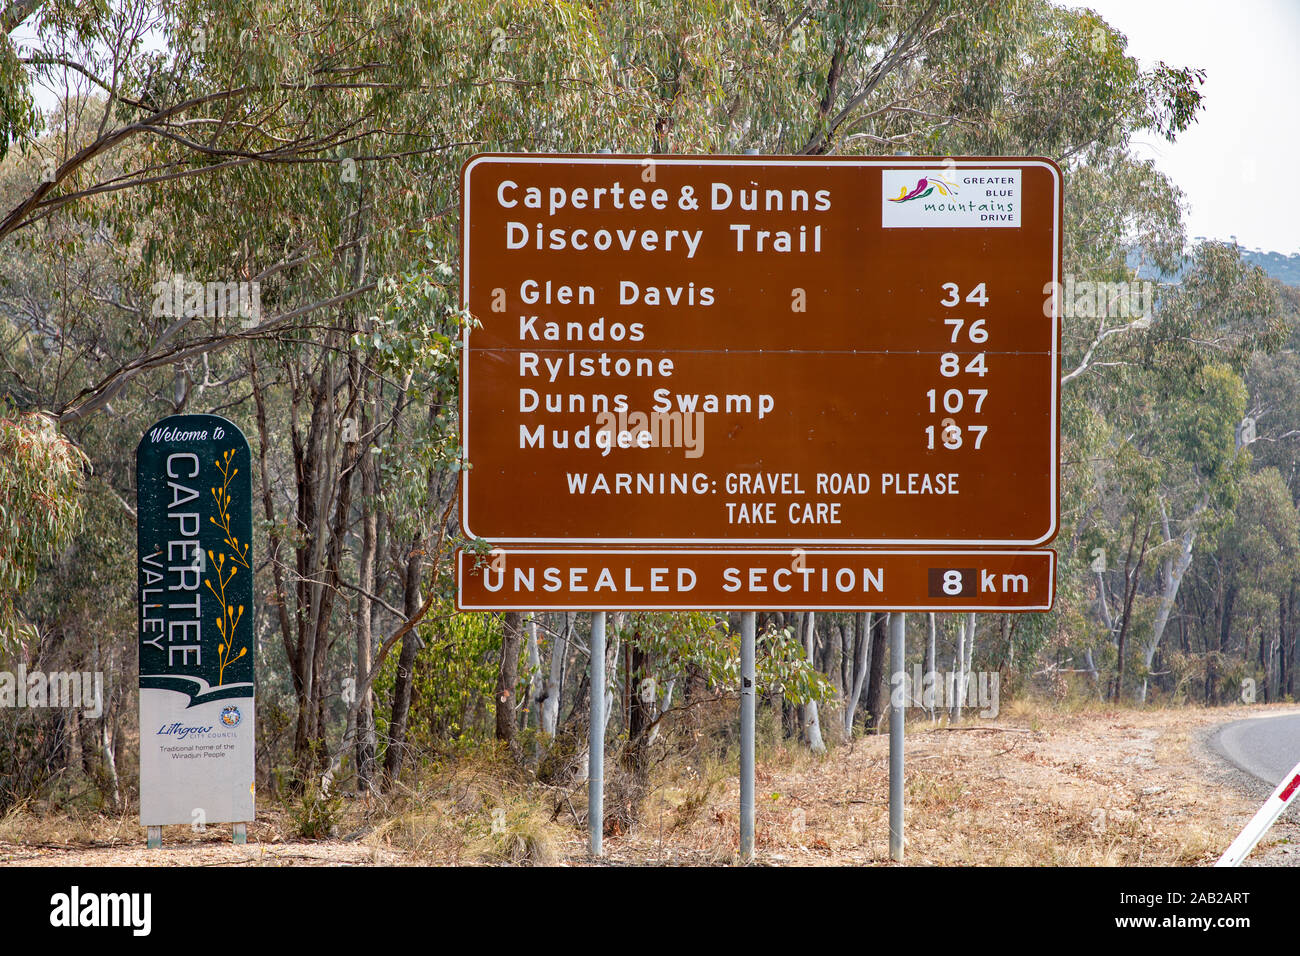 Capertee valley and Dunns discovery trail in regional new south wales,Australia Stock Photo